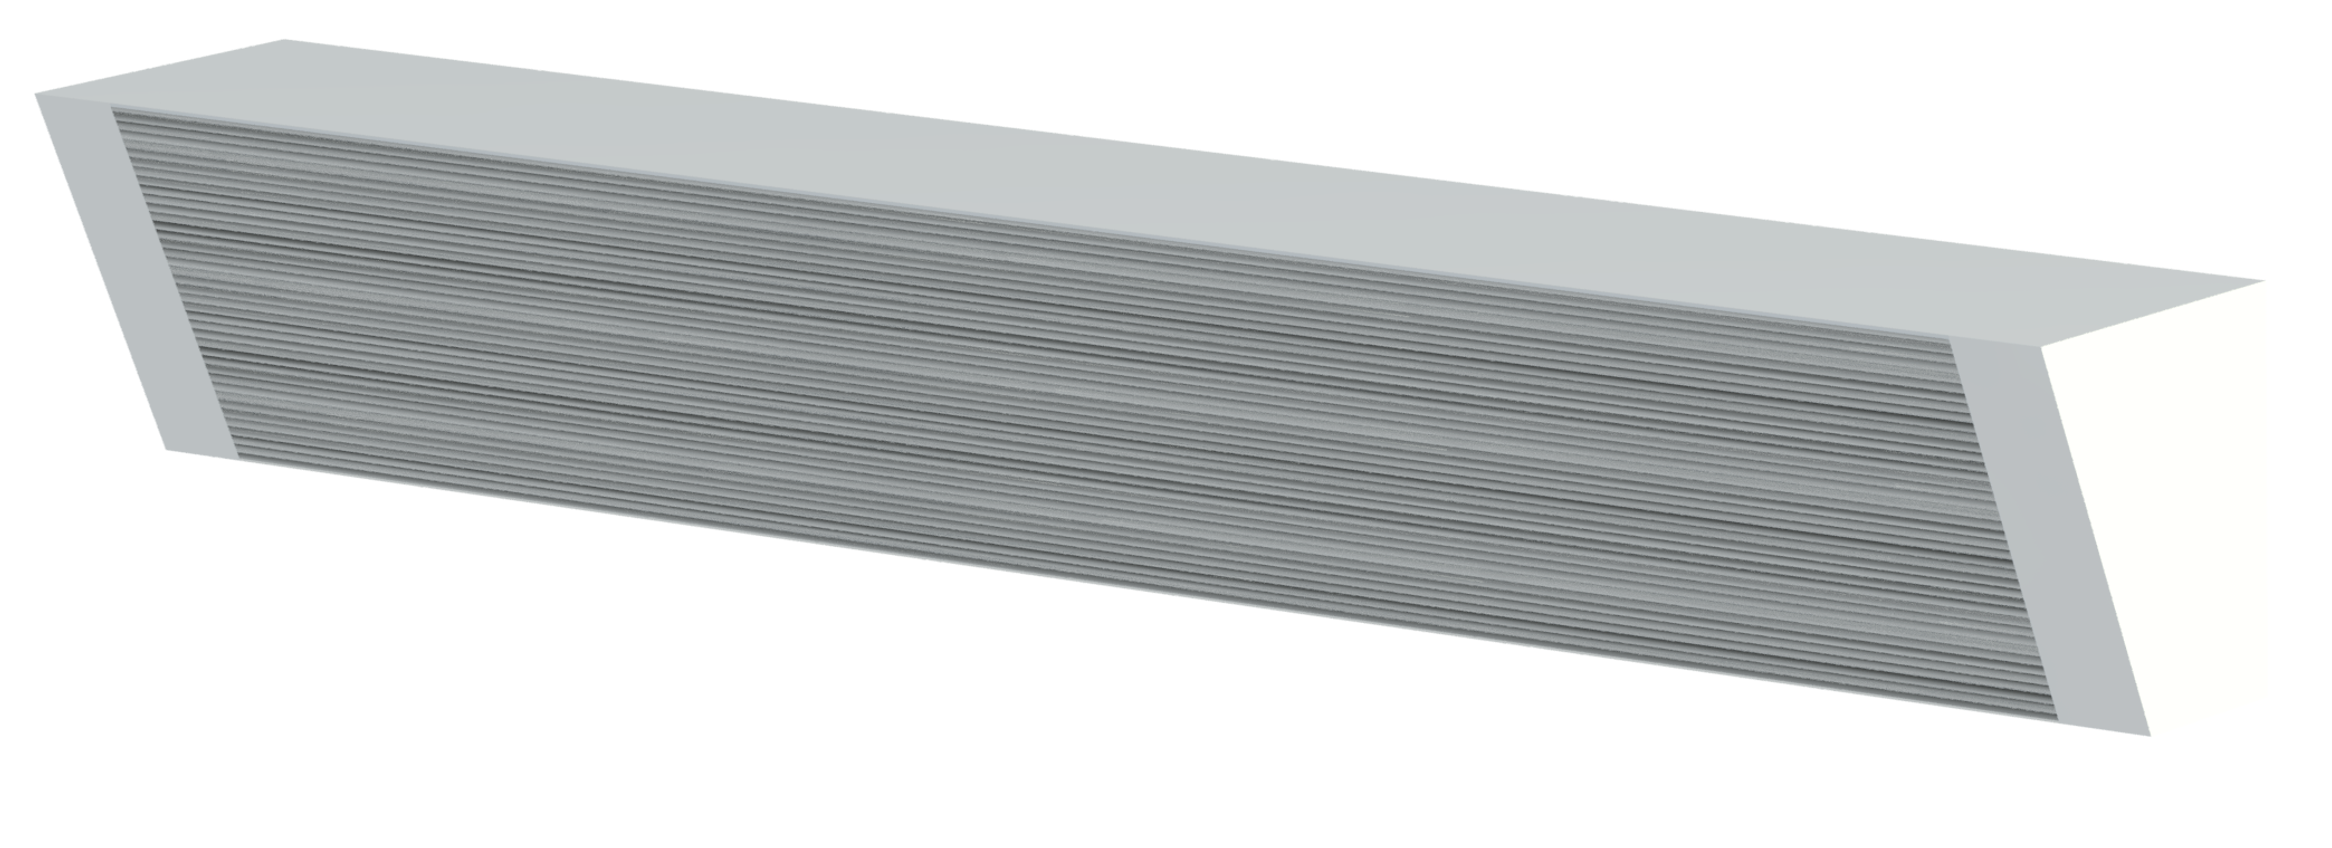 A render of a metallic, wall-mounted cove heater from manufacturer King, which bends at an angle, so can be placed along a wall and ceiling  